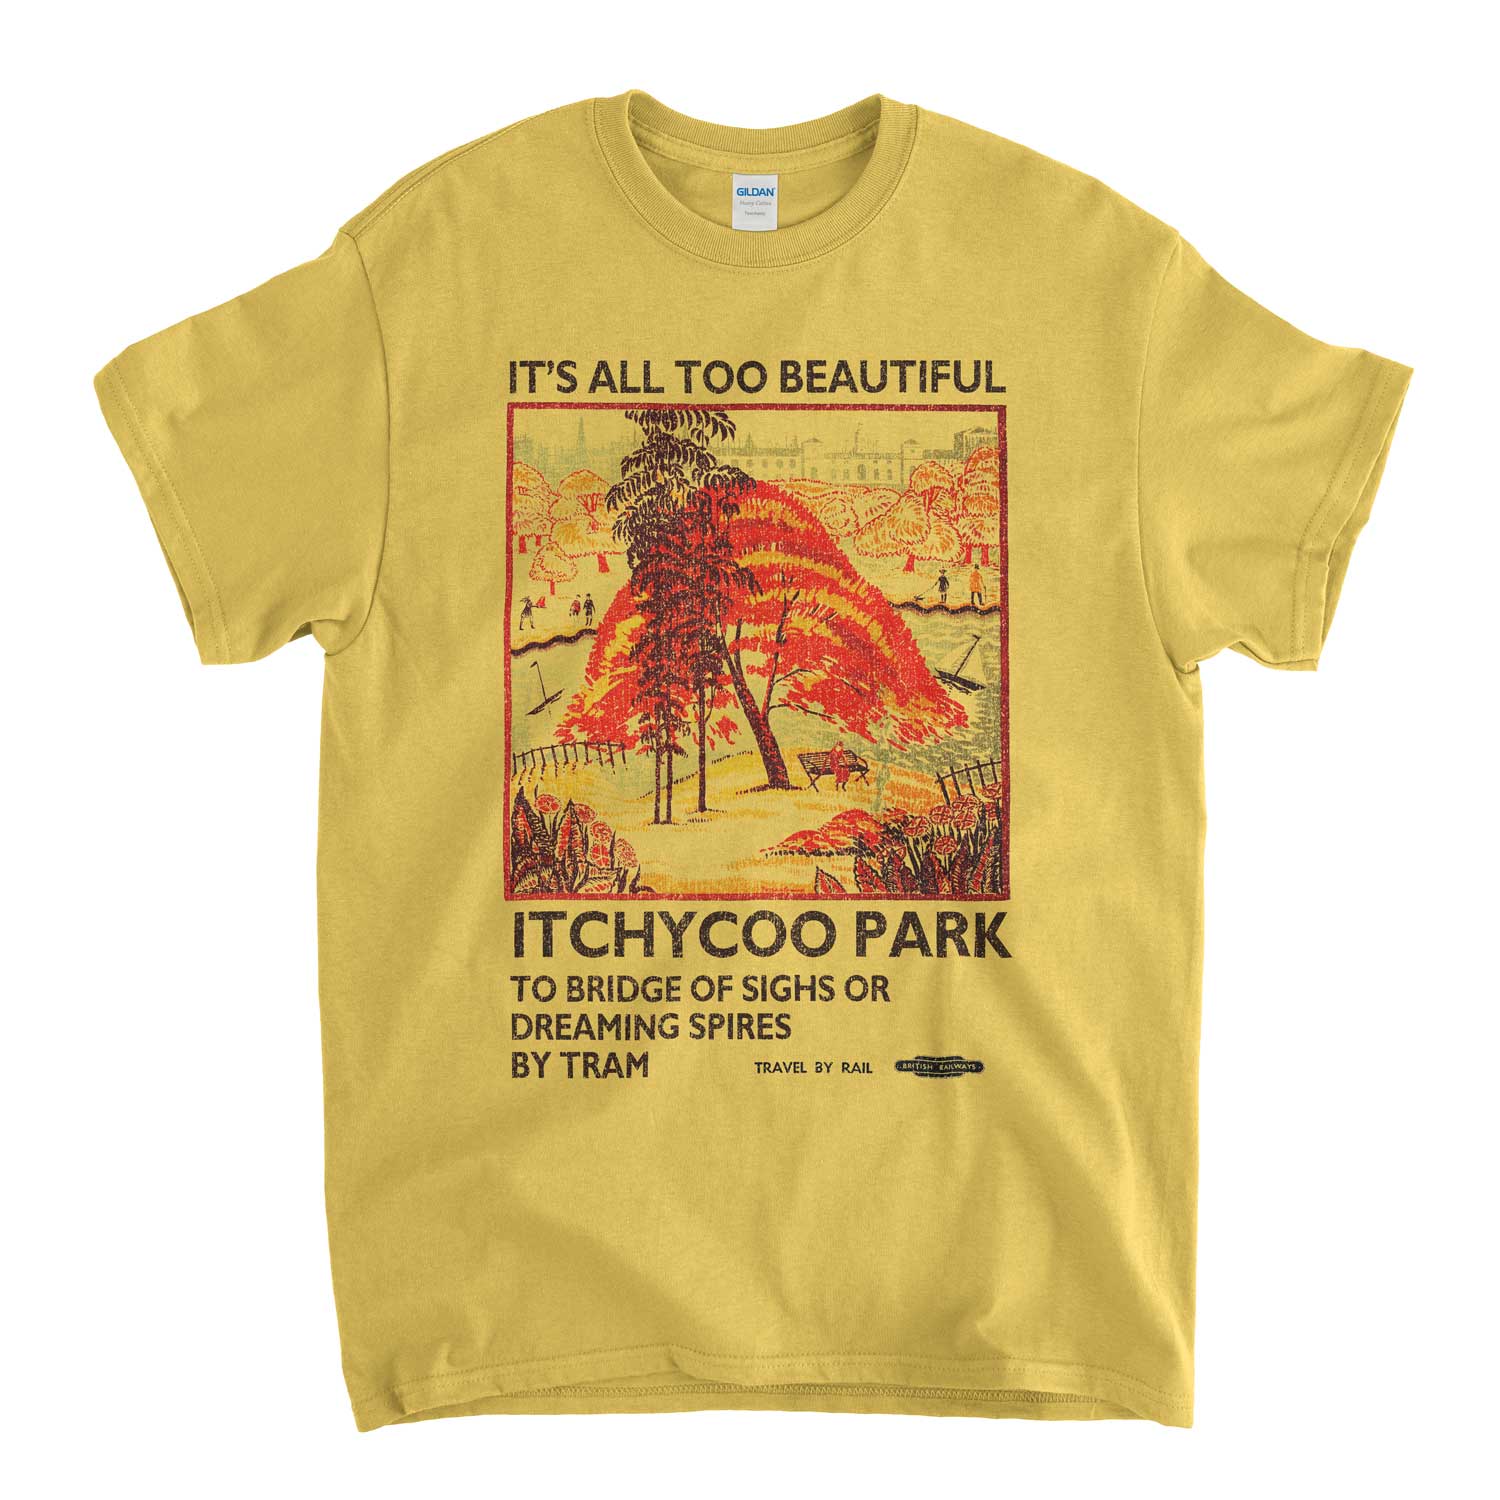 Inspired by The Small Faces T Shirt - Itchycoo Park Travel Poster